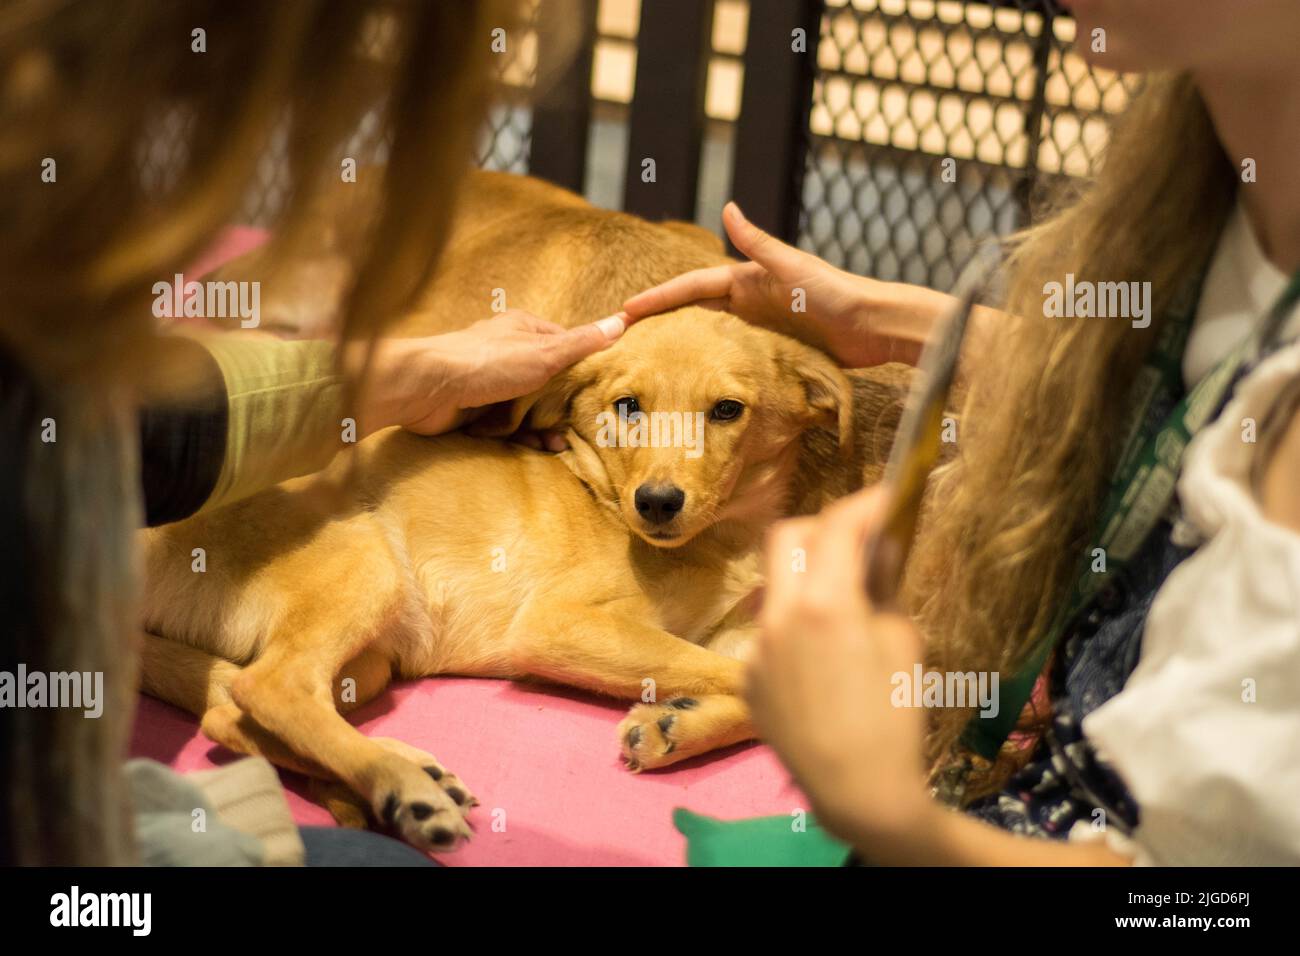 A brown puppy on a pink couch being held by women Stock Photo